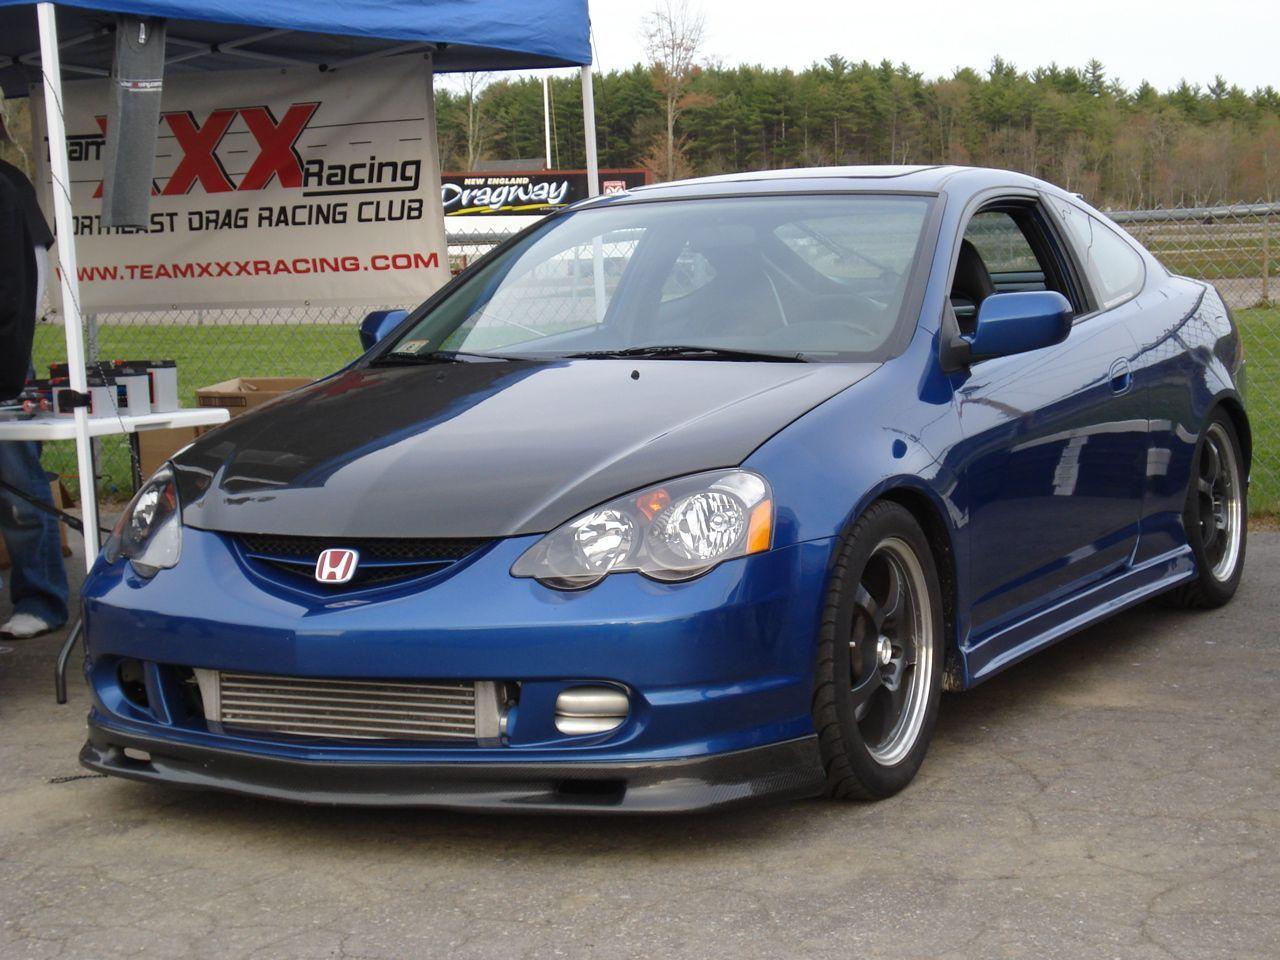 Acura RSX Type S. Cars. Cars, Jdm and Honda